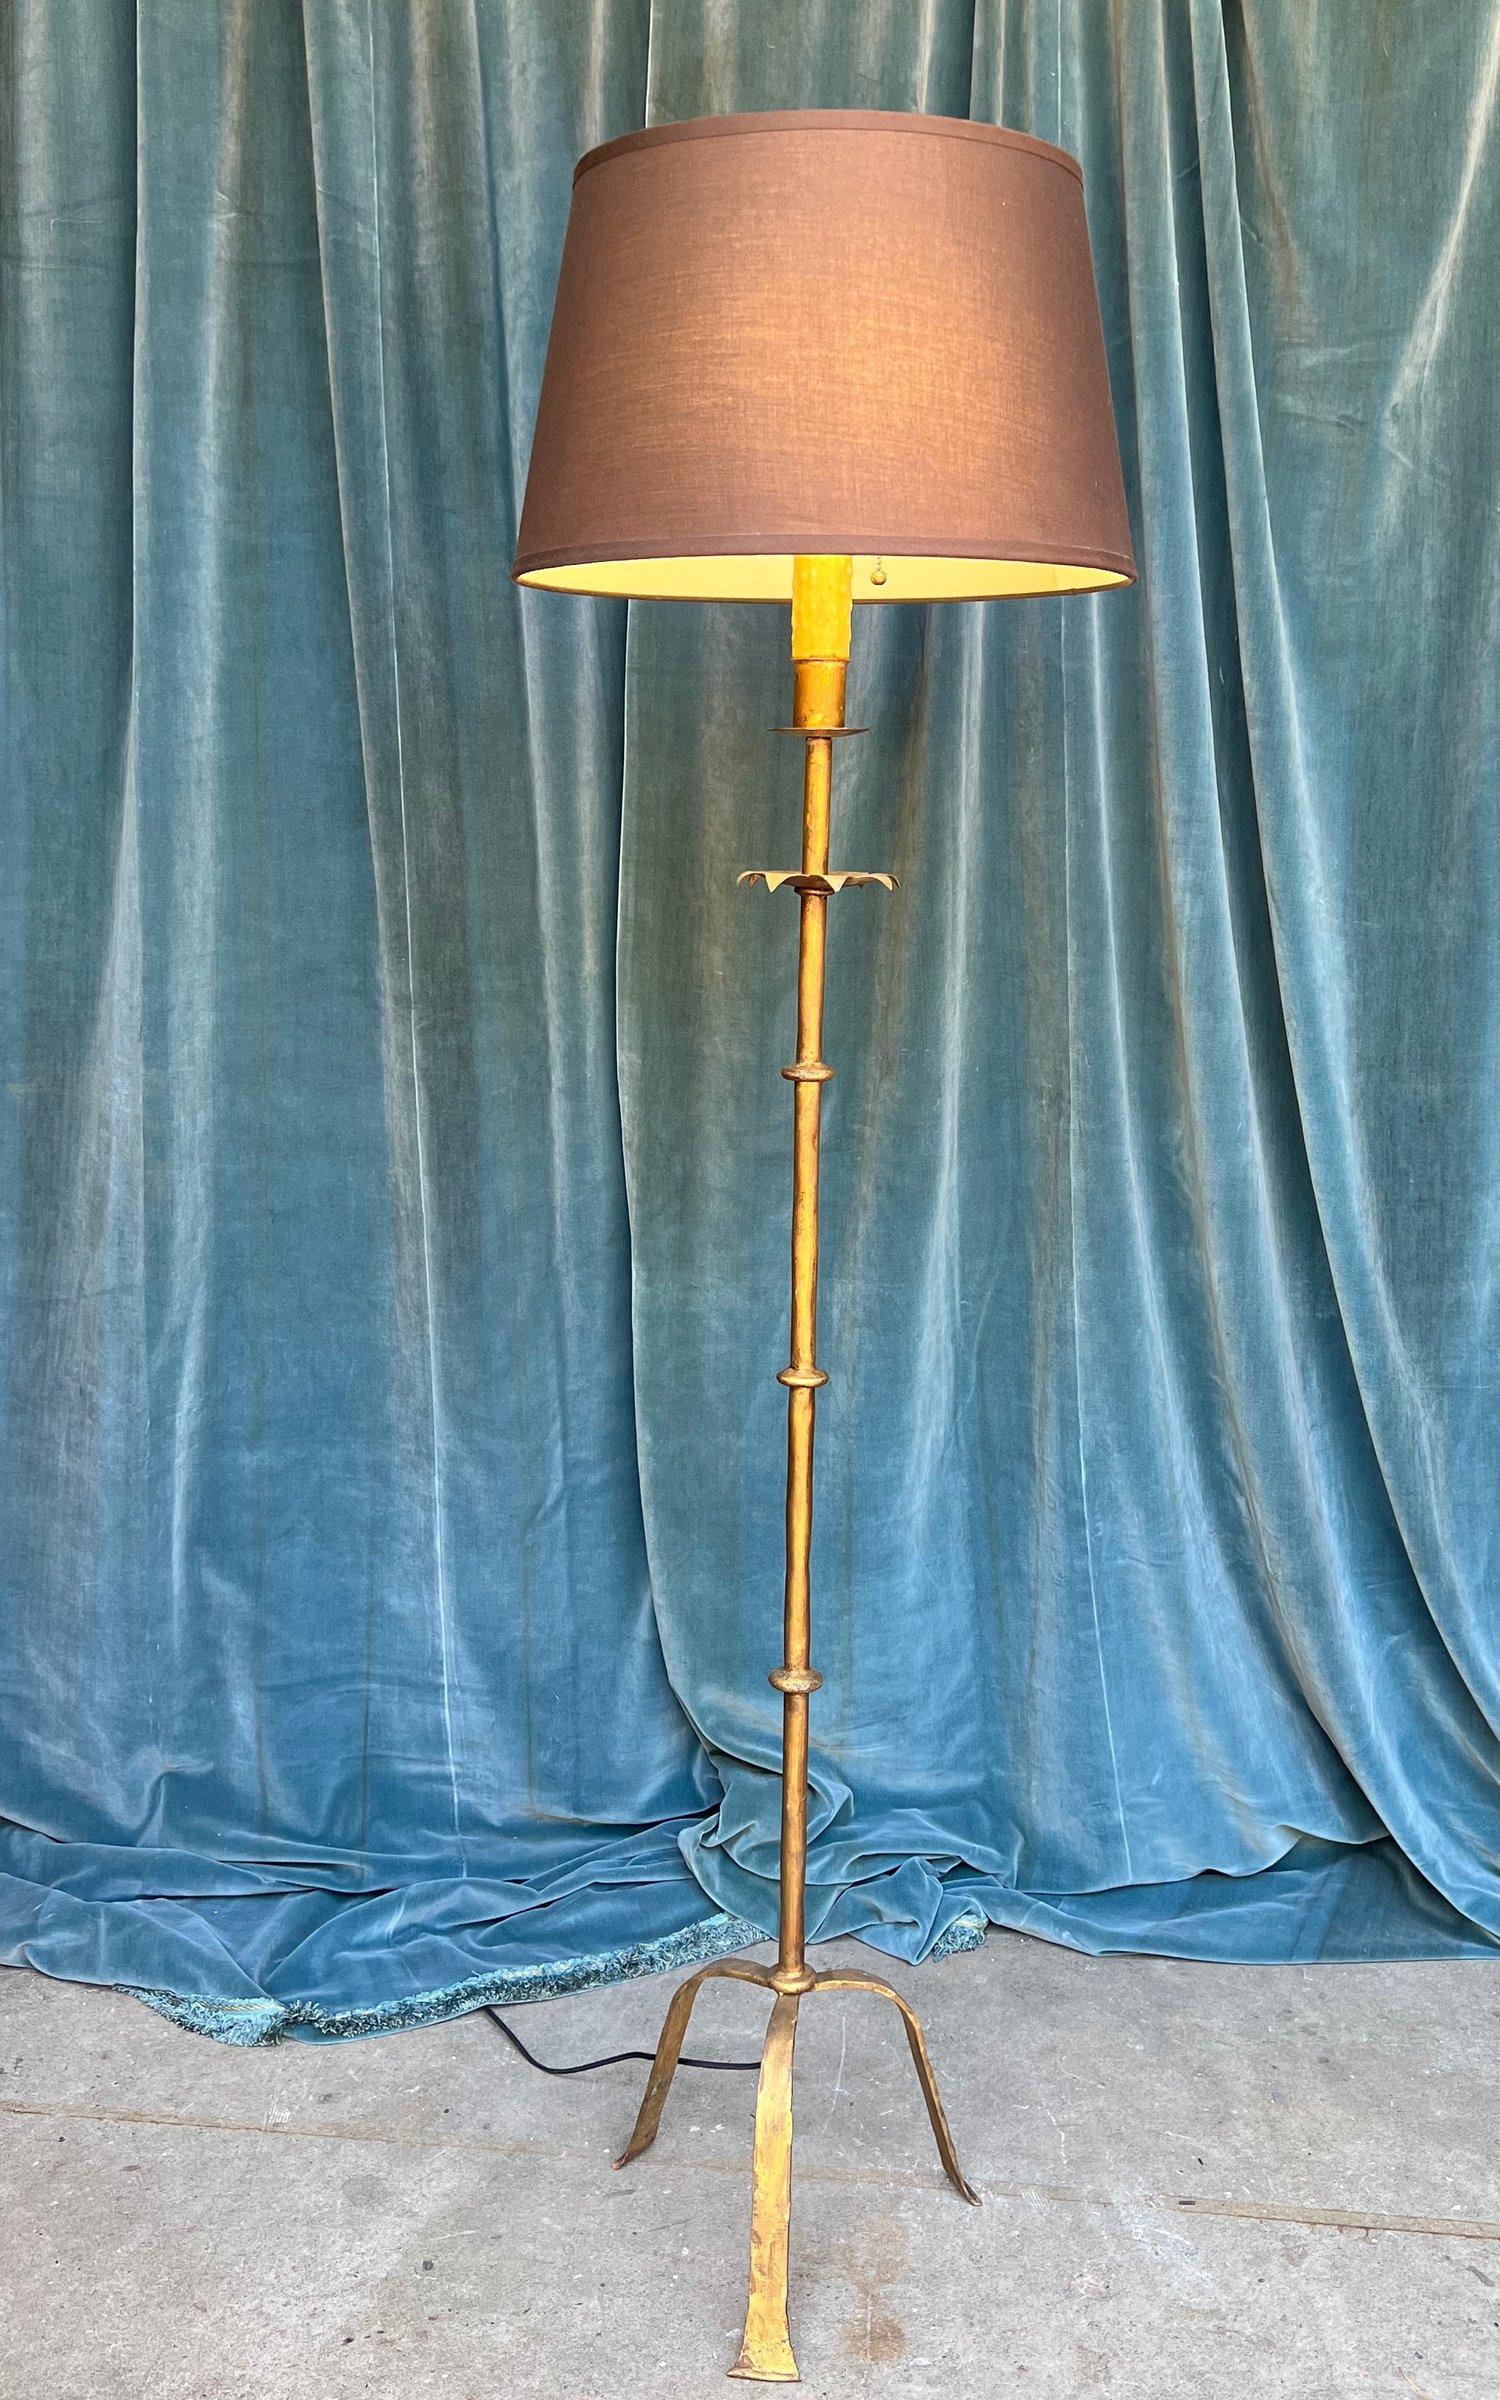 This Spanish 1950s wrought iron floor lamp is an embodiment of elegance and grace, perfect for illuminating any room. The elongated and raised tripod base, finished in a rich dark gilt patina, adds a sophisticated ambiance to the lamp. The stem of